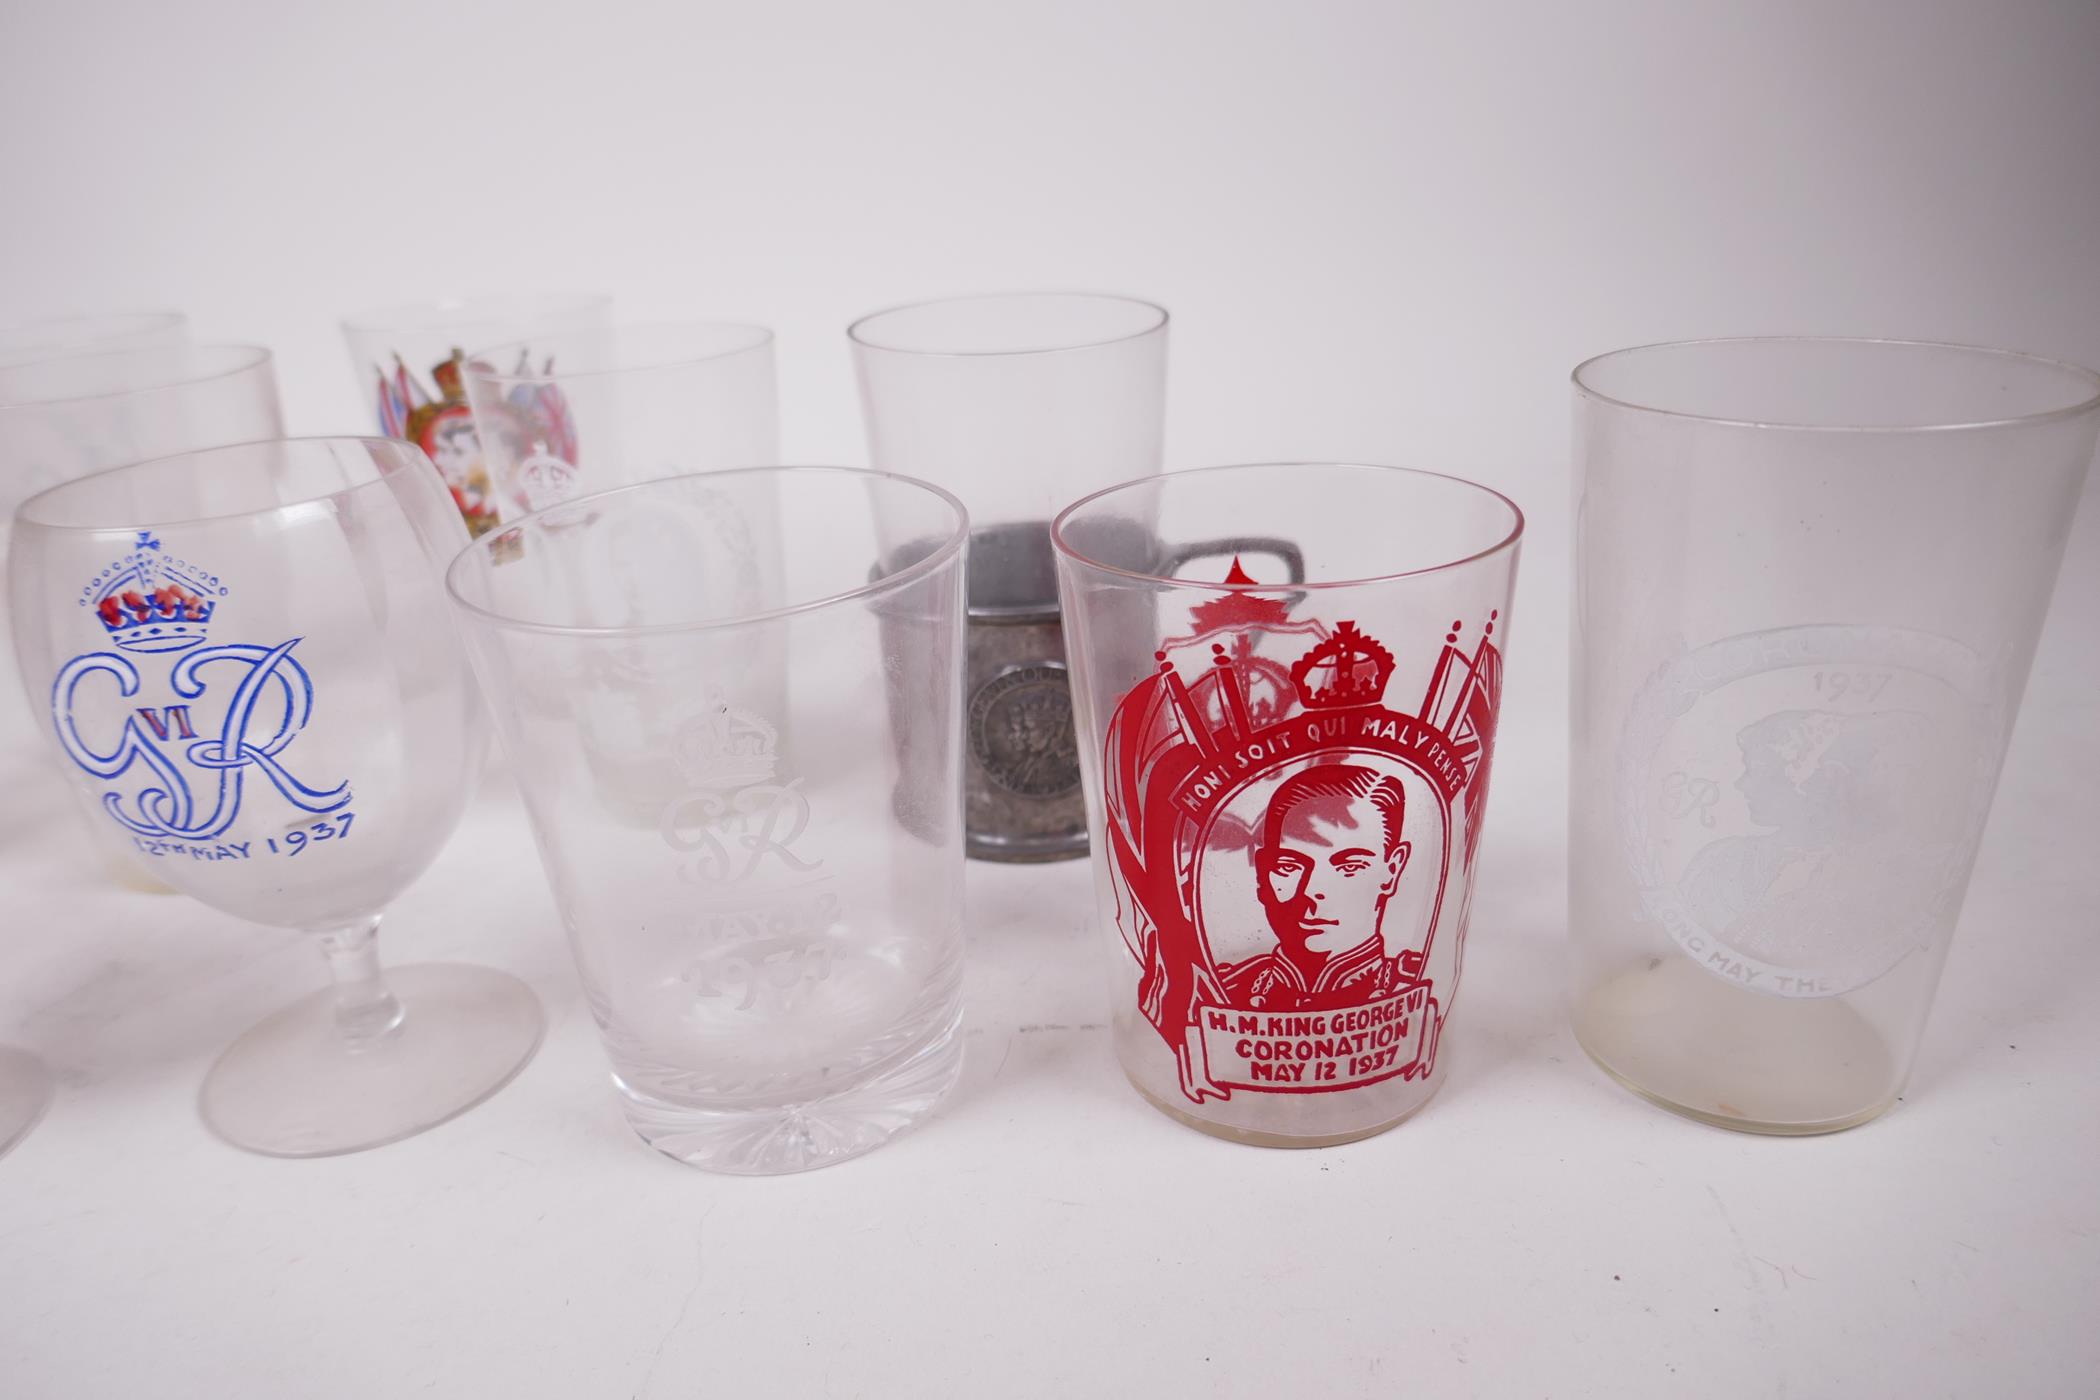 Thirteen pub glasses commemorating the 1937 coronation of George VI and Queen Elizabeth - Image 3 of 7